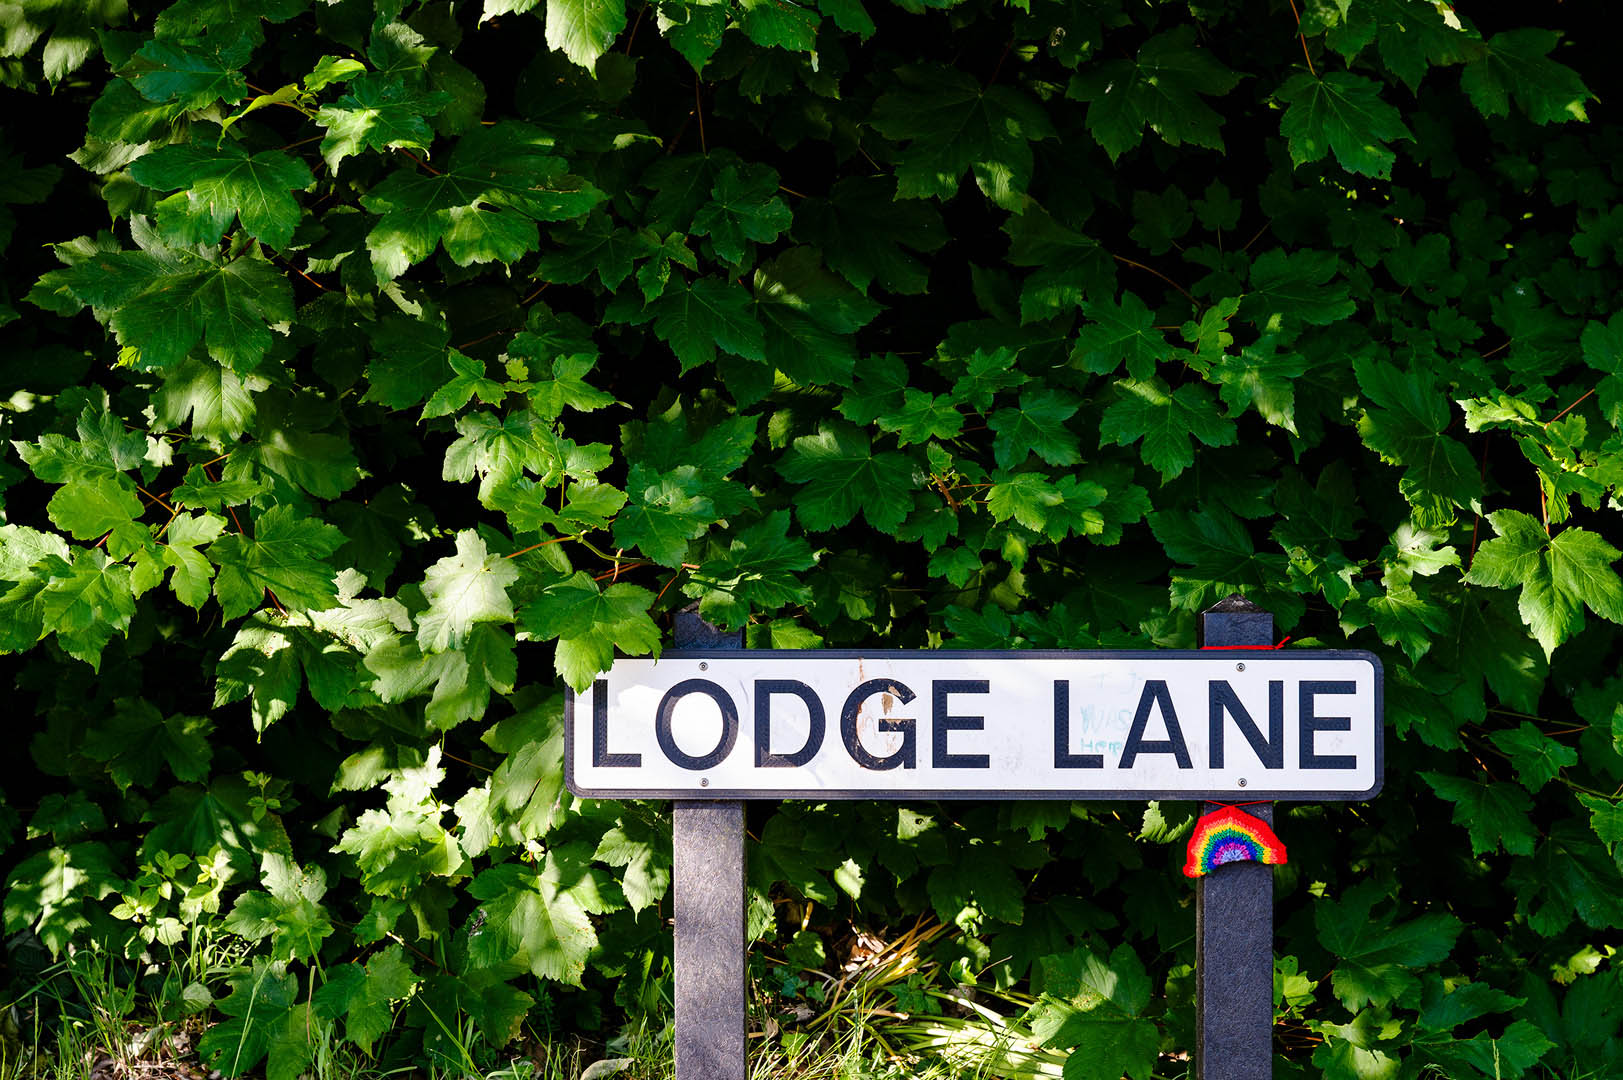 Knitted rainbow in semi shadow on street sign in dappled light